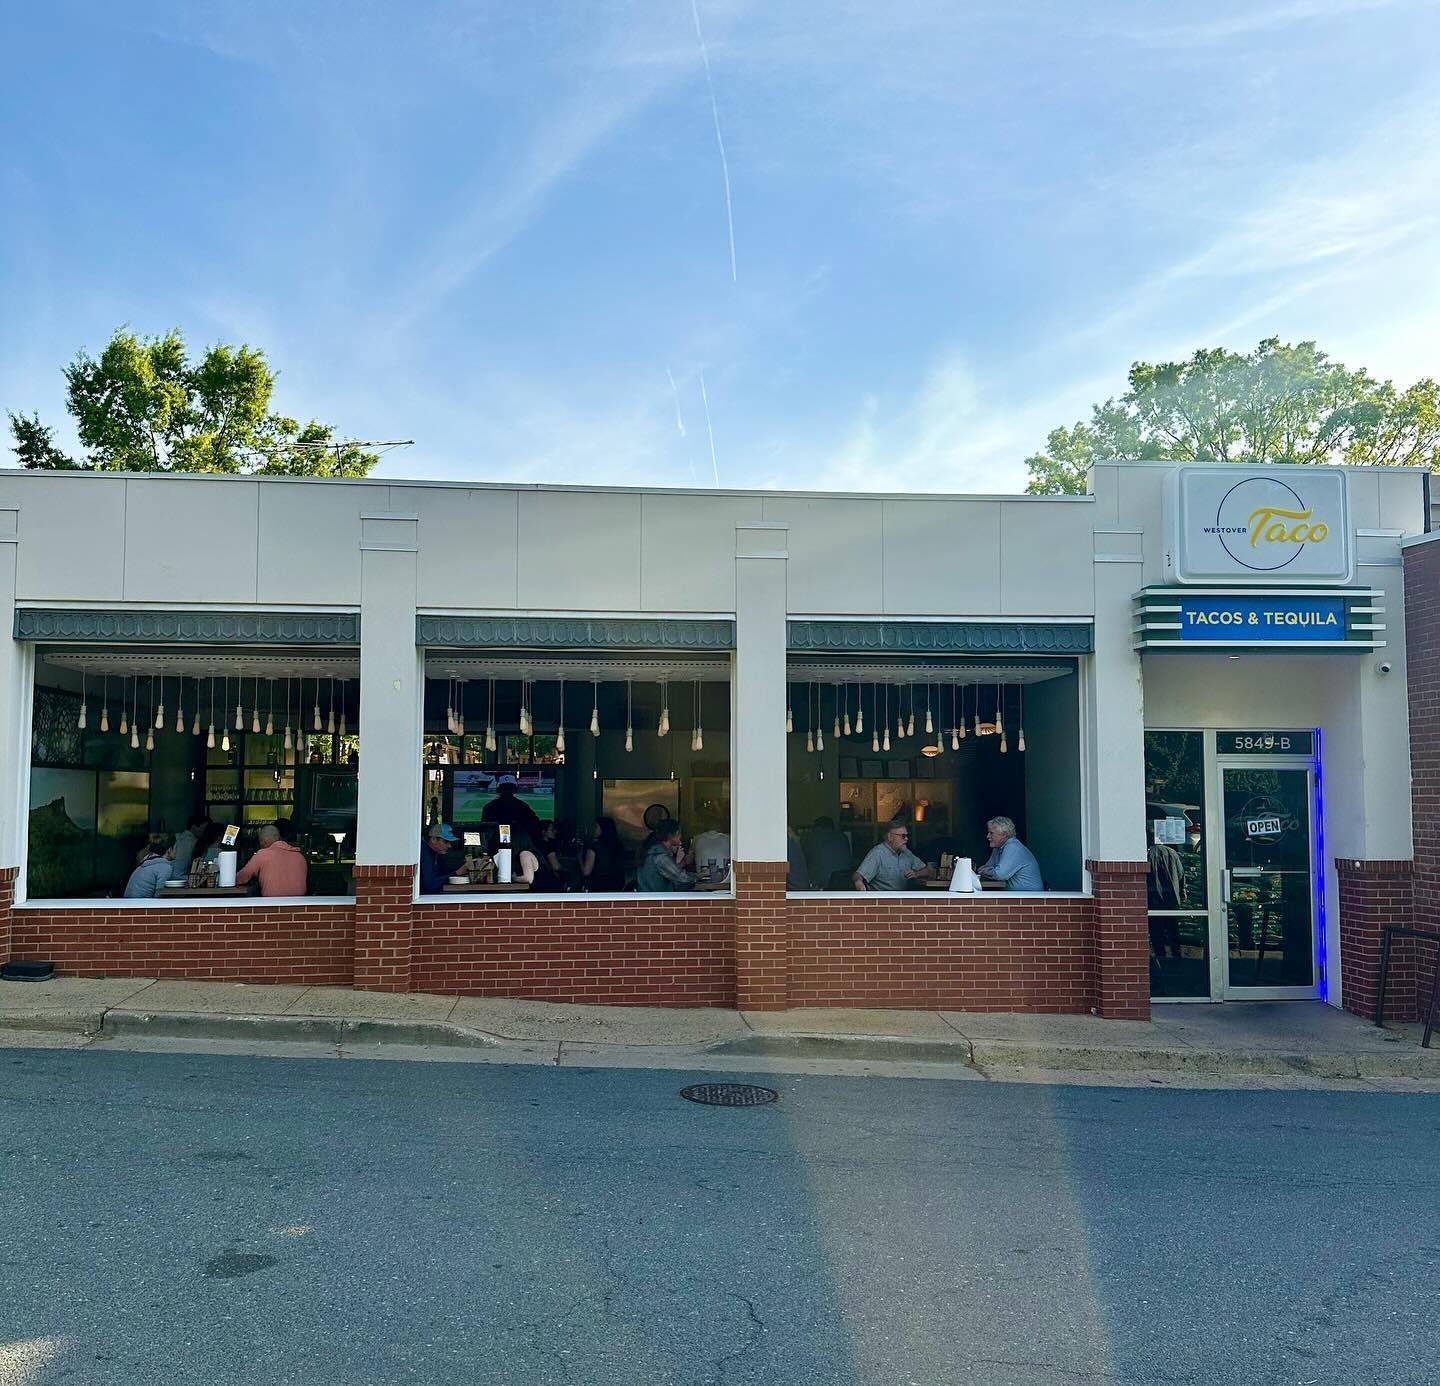 The windows are up and the weekend is rocking. Join us Sunday for our first Cinco de Mayo for $3 tacos all day. The warm weather is here, and we're loving it in Westover.